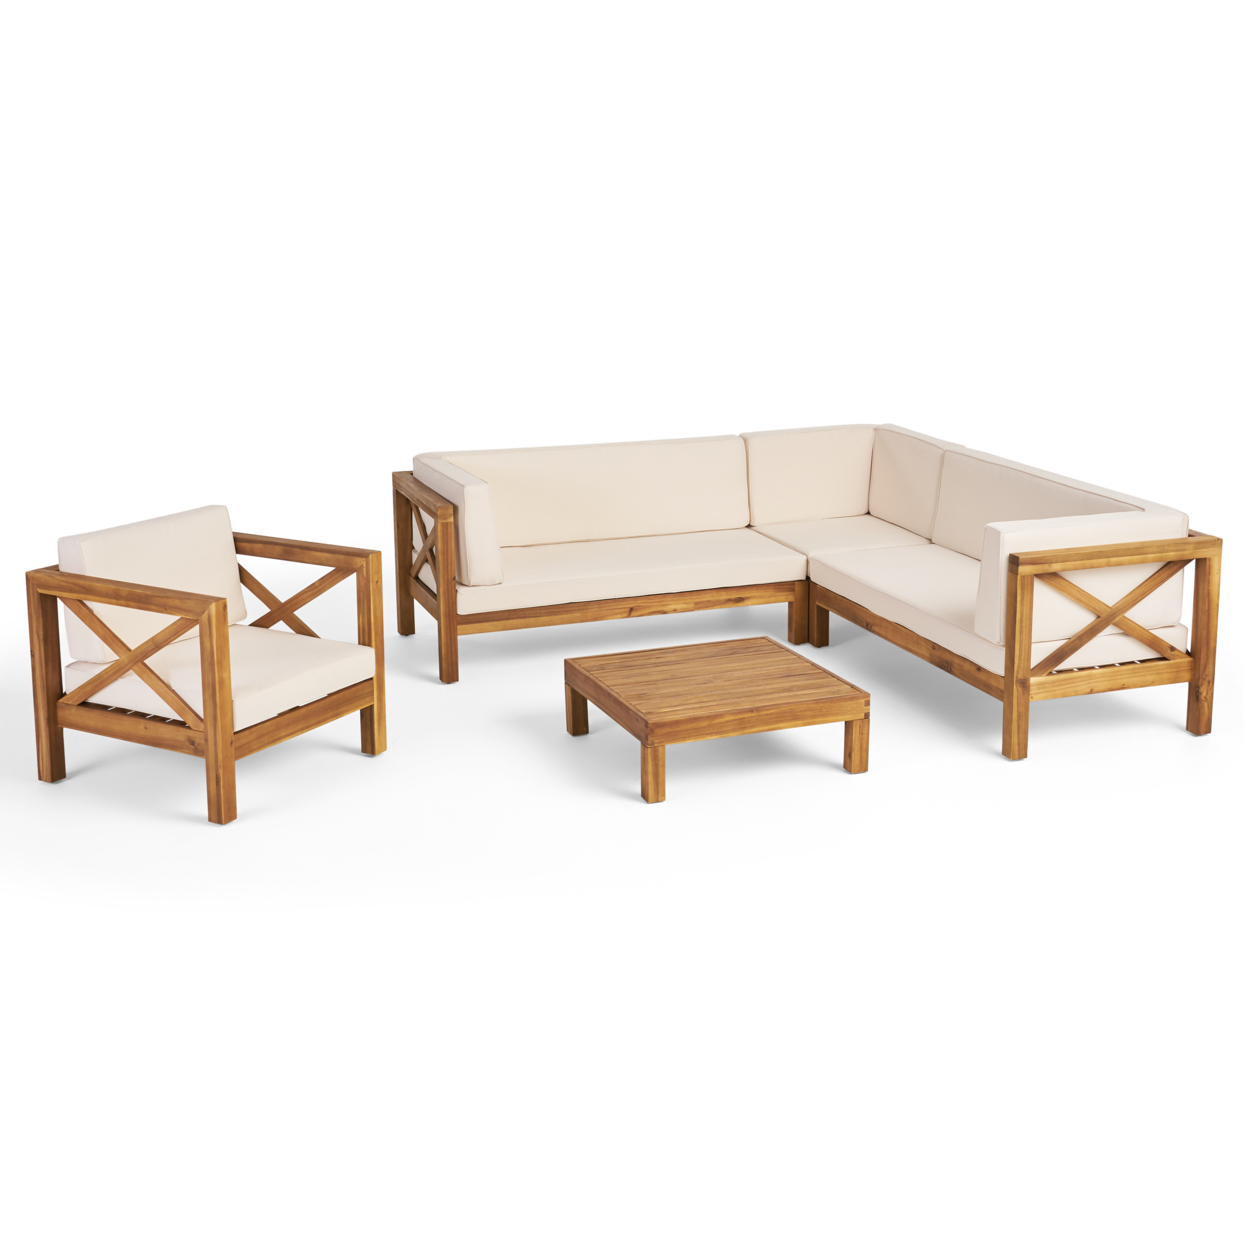 Morgan Outdoor 6 Seater Acacia Wood Sectional Sofa And Club Chair Set - Teak Finish + Beige